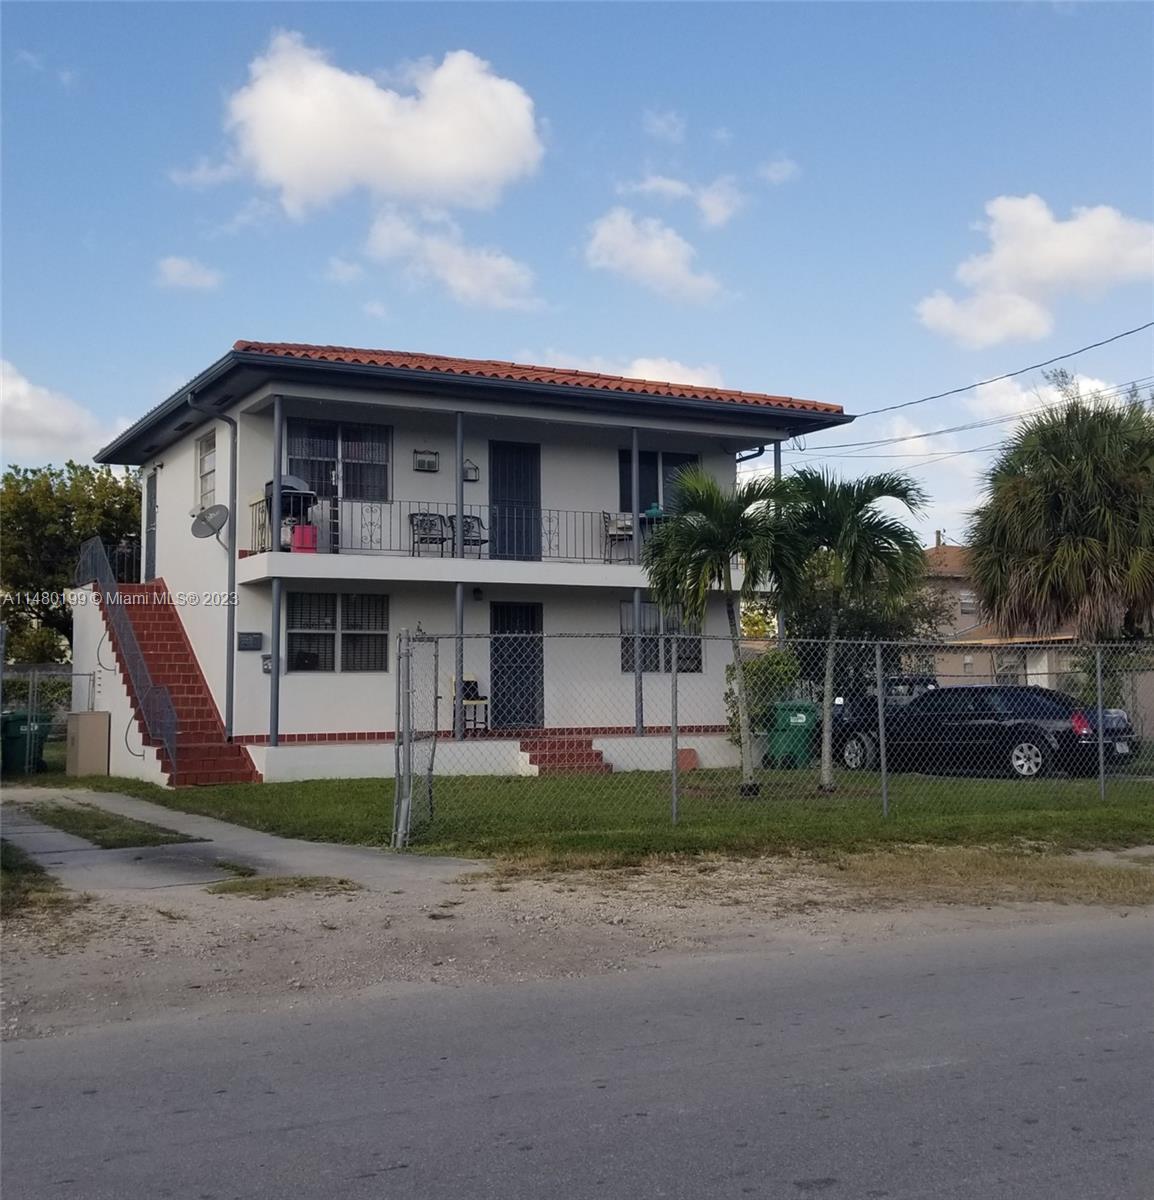 Photo of 2925 NW 132nd Ter in Opa-Locka, FL